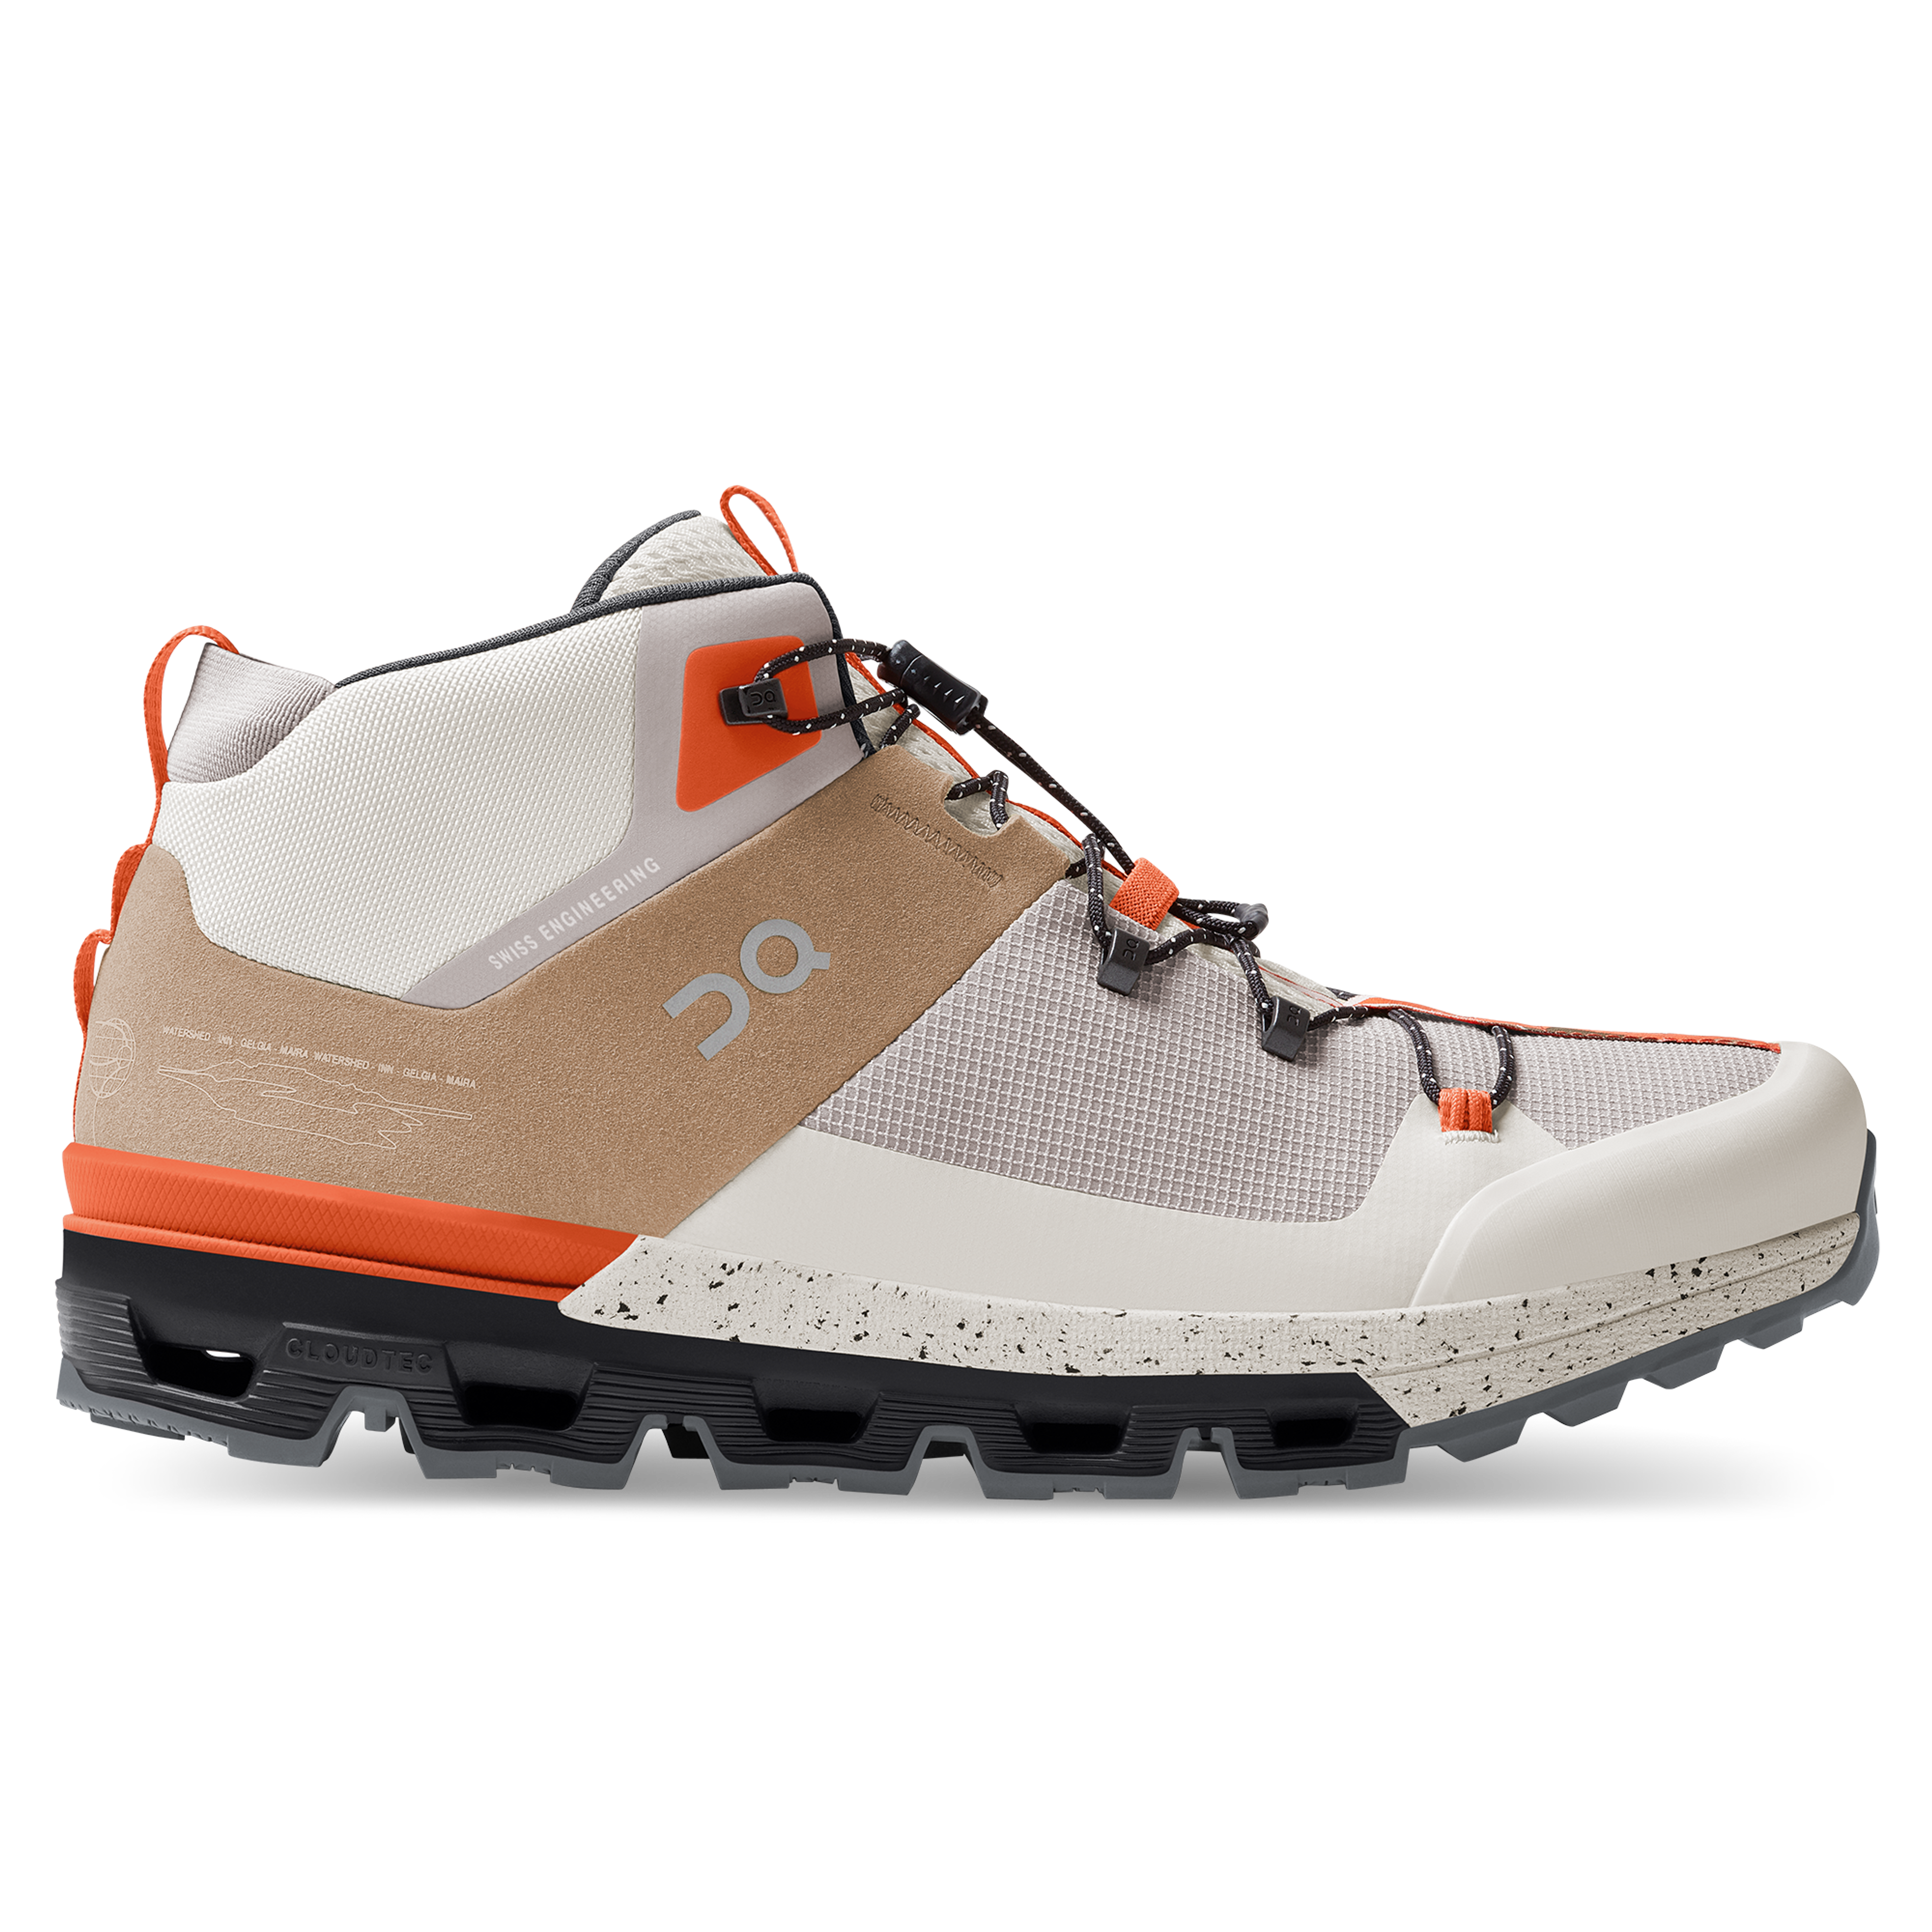 Cloudtrax: hiking boot for street and mountain peaks | On